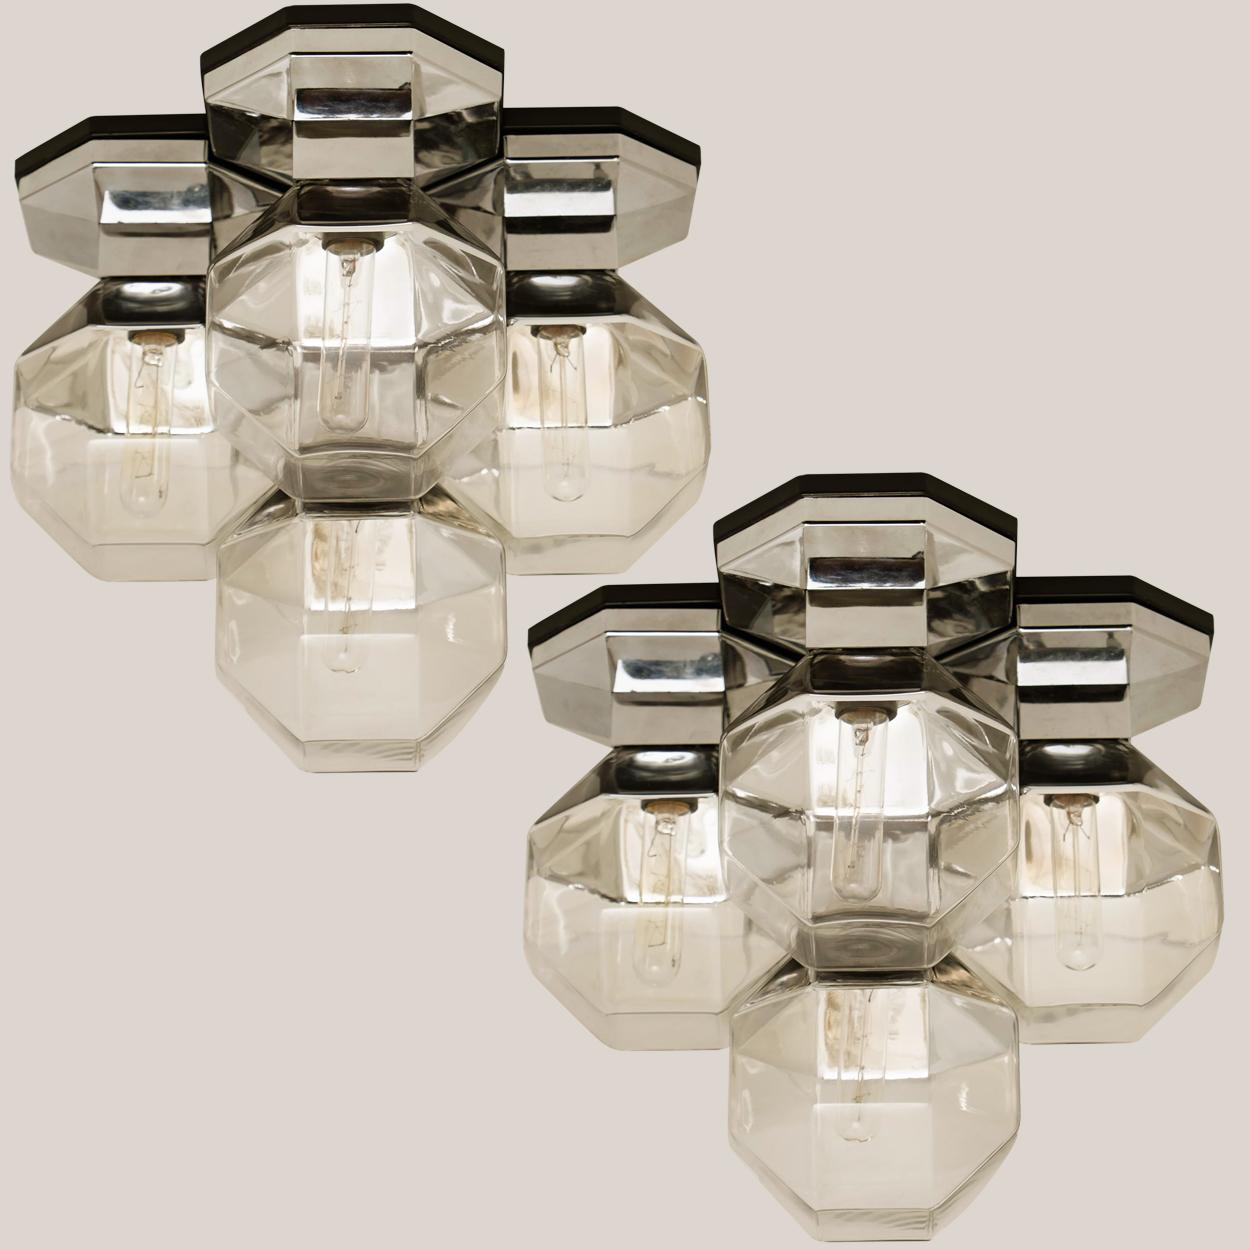 One of the four rare wall or flushmount ceiling lamps by Motoko Ishii for Staff Lighting Company, Germany. Heat-resistant resin, metalized base and 4 clear glass shades. Beautiful design, reflective lamps in all directions. Typical design from the